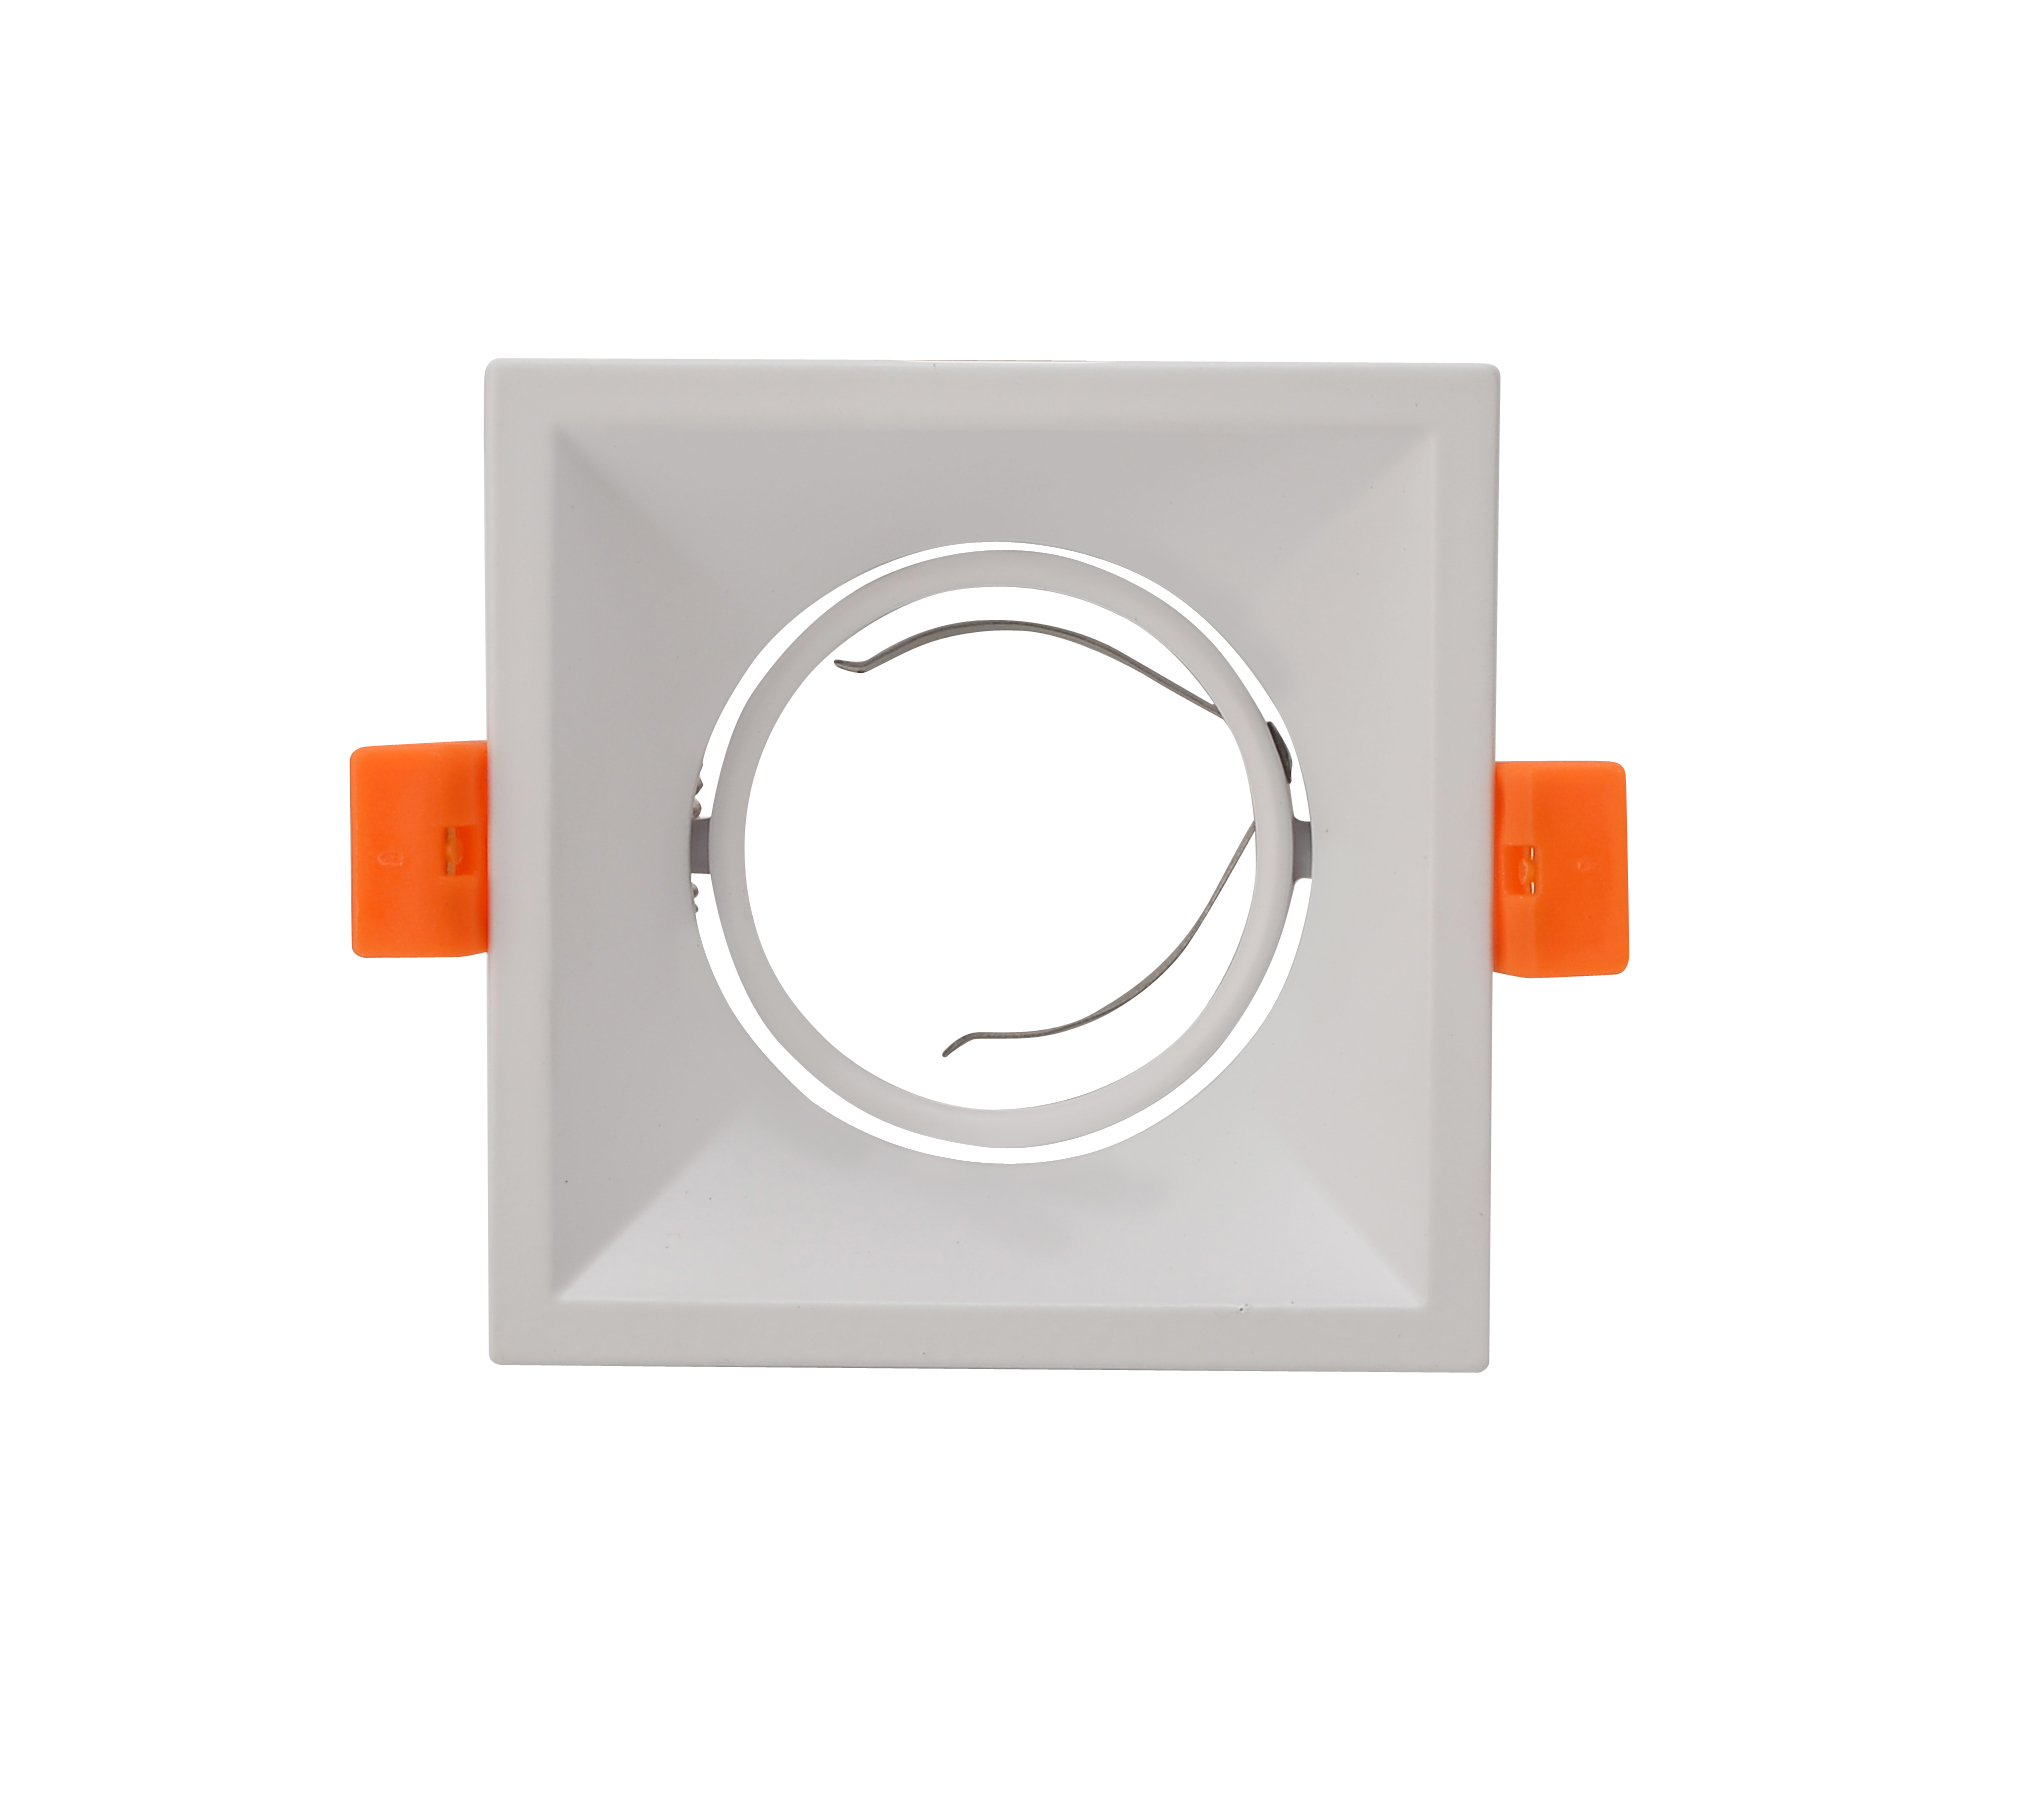 Aluminum recessed square gu10 led downlight frame mr16 light fixture for home hotel gallery